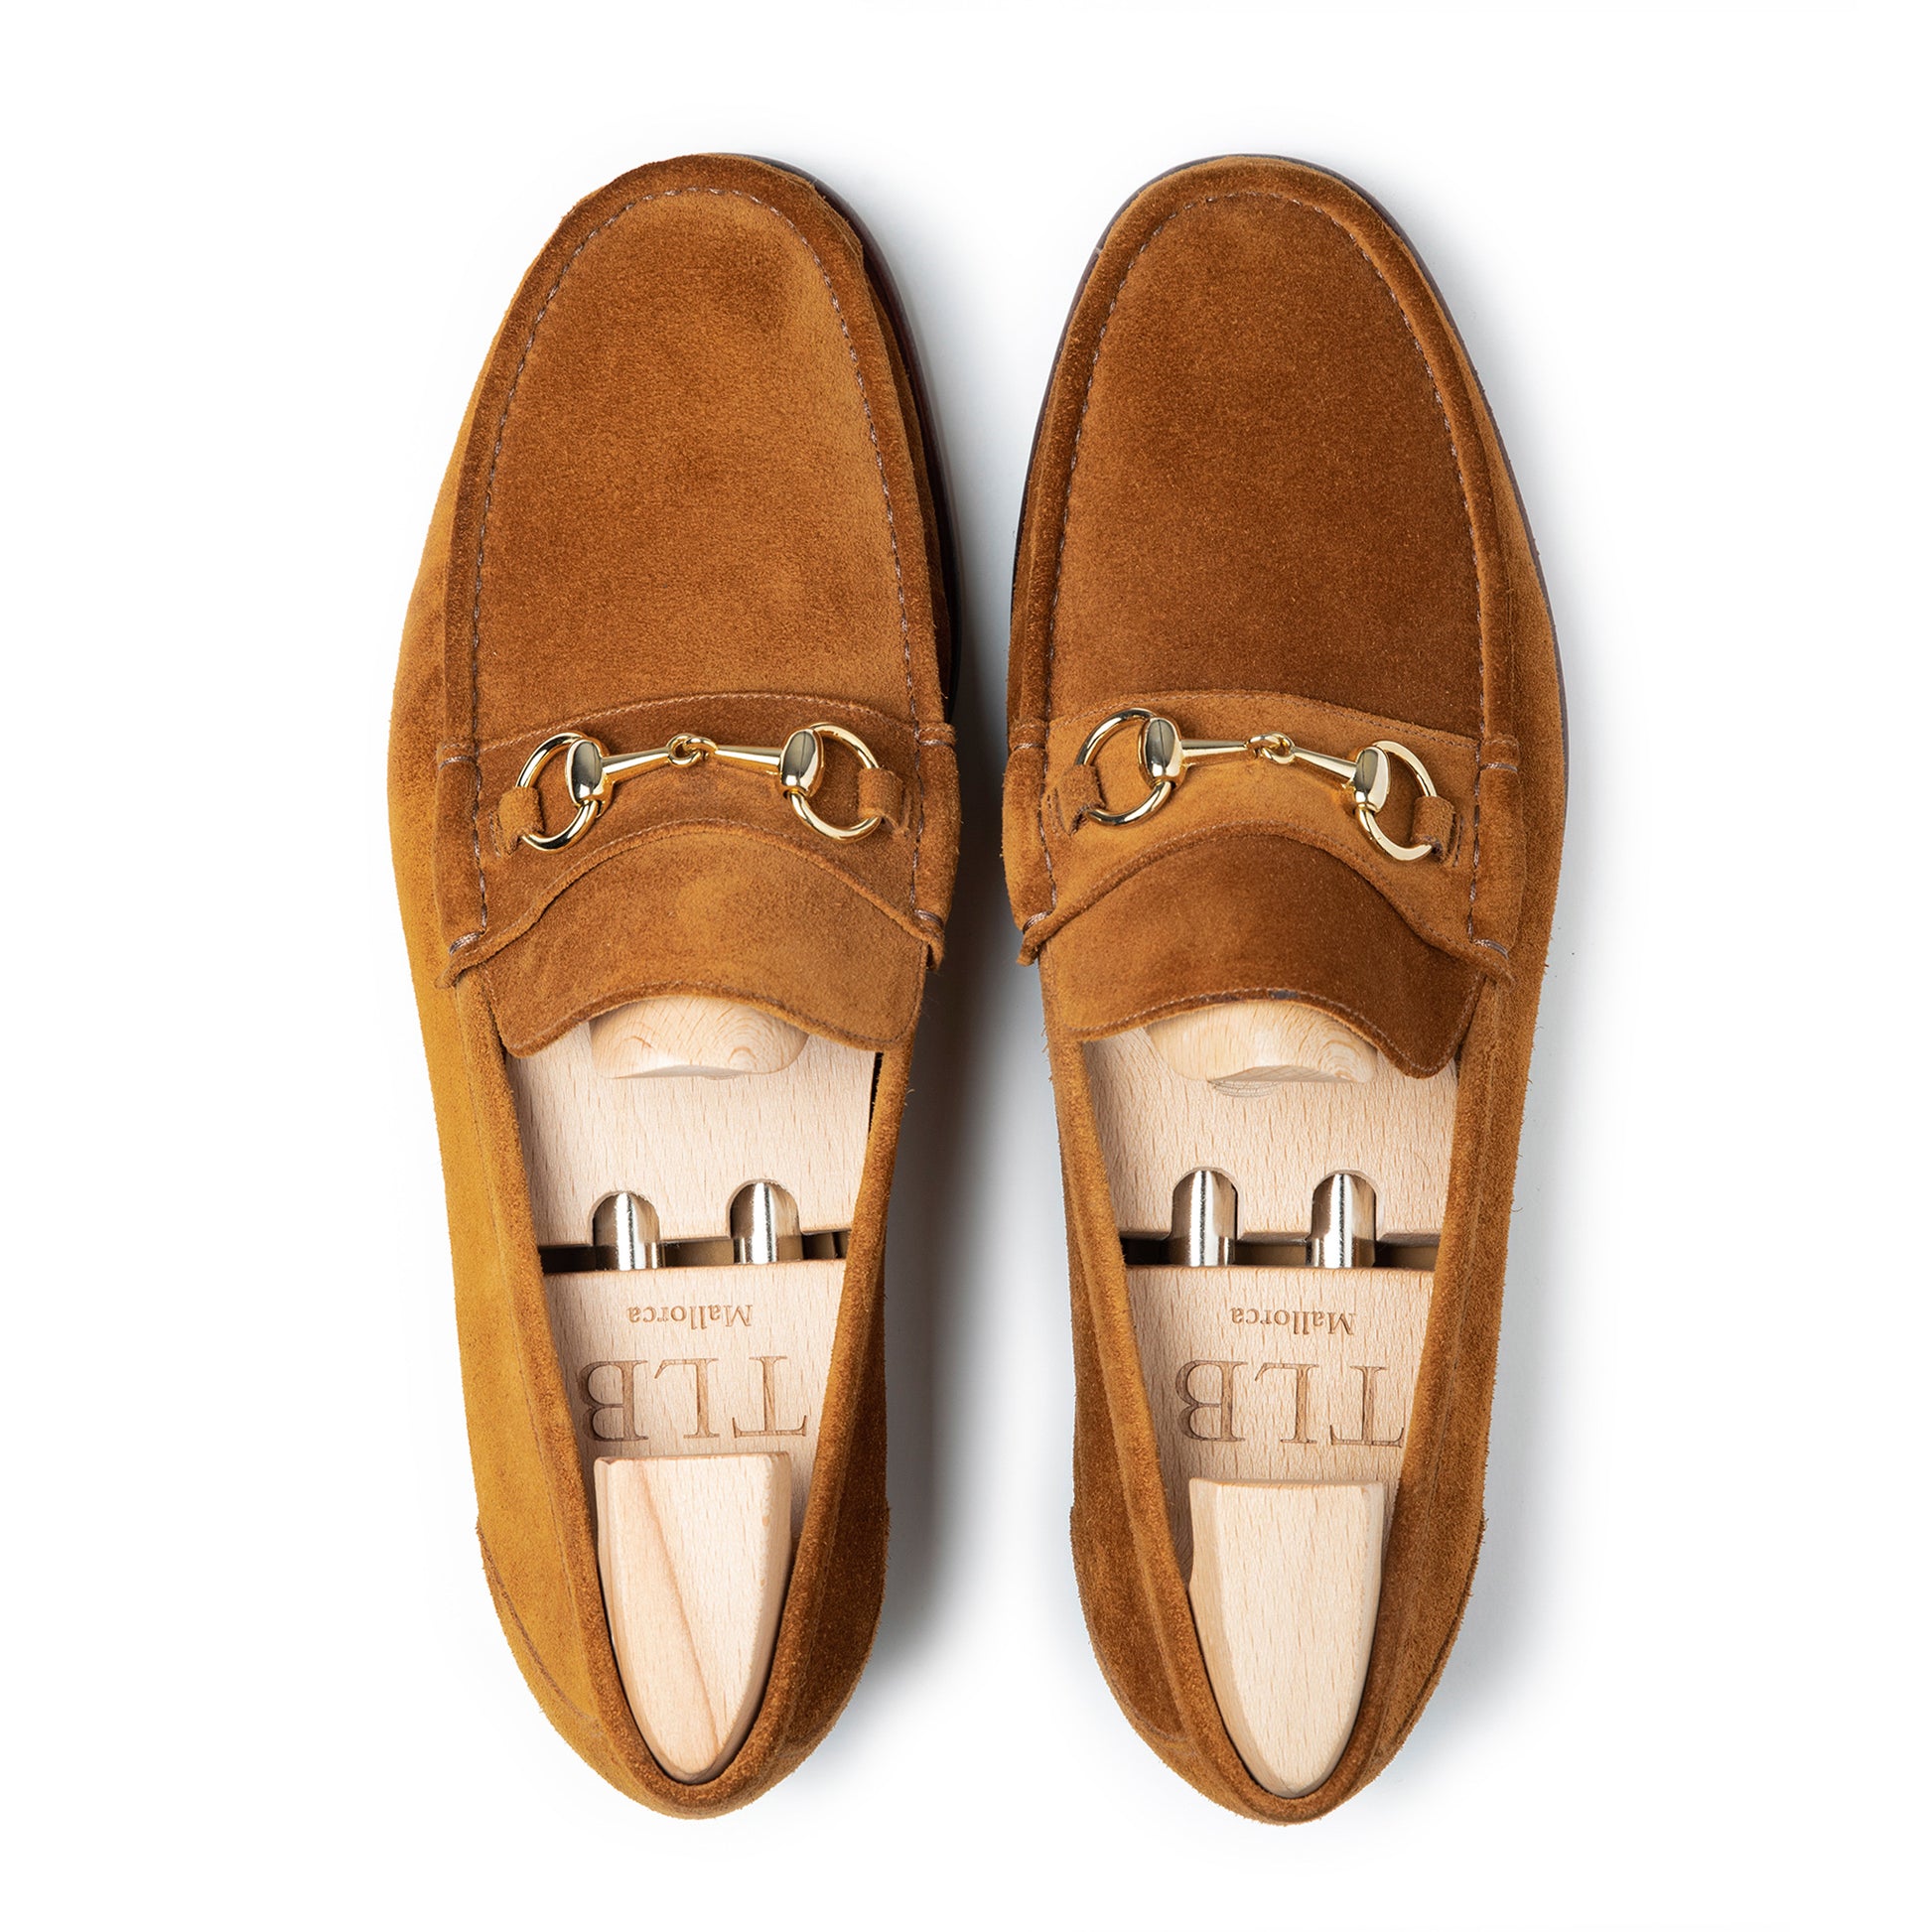 TLB Mallorca Oxford loafers | Men's Oxford shoes | Model 2508 suede light